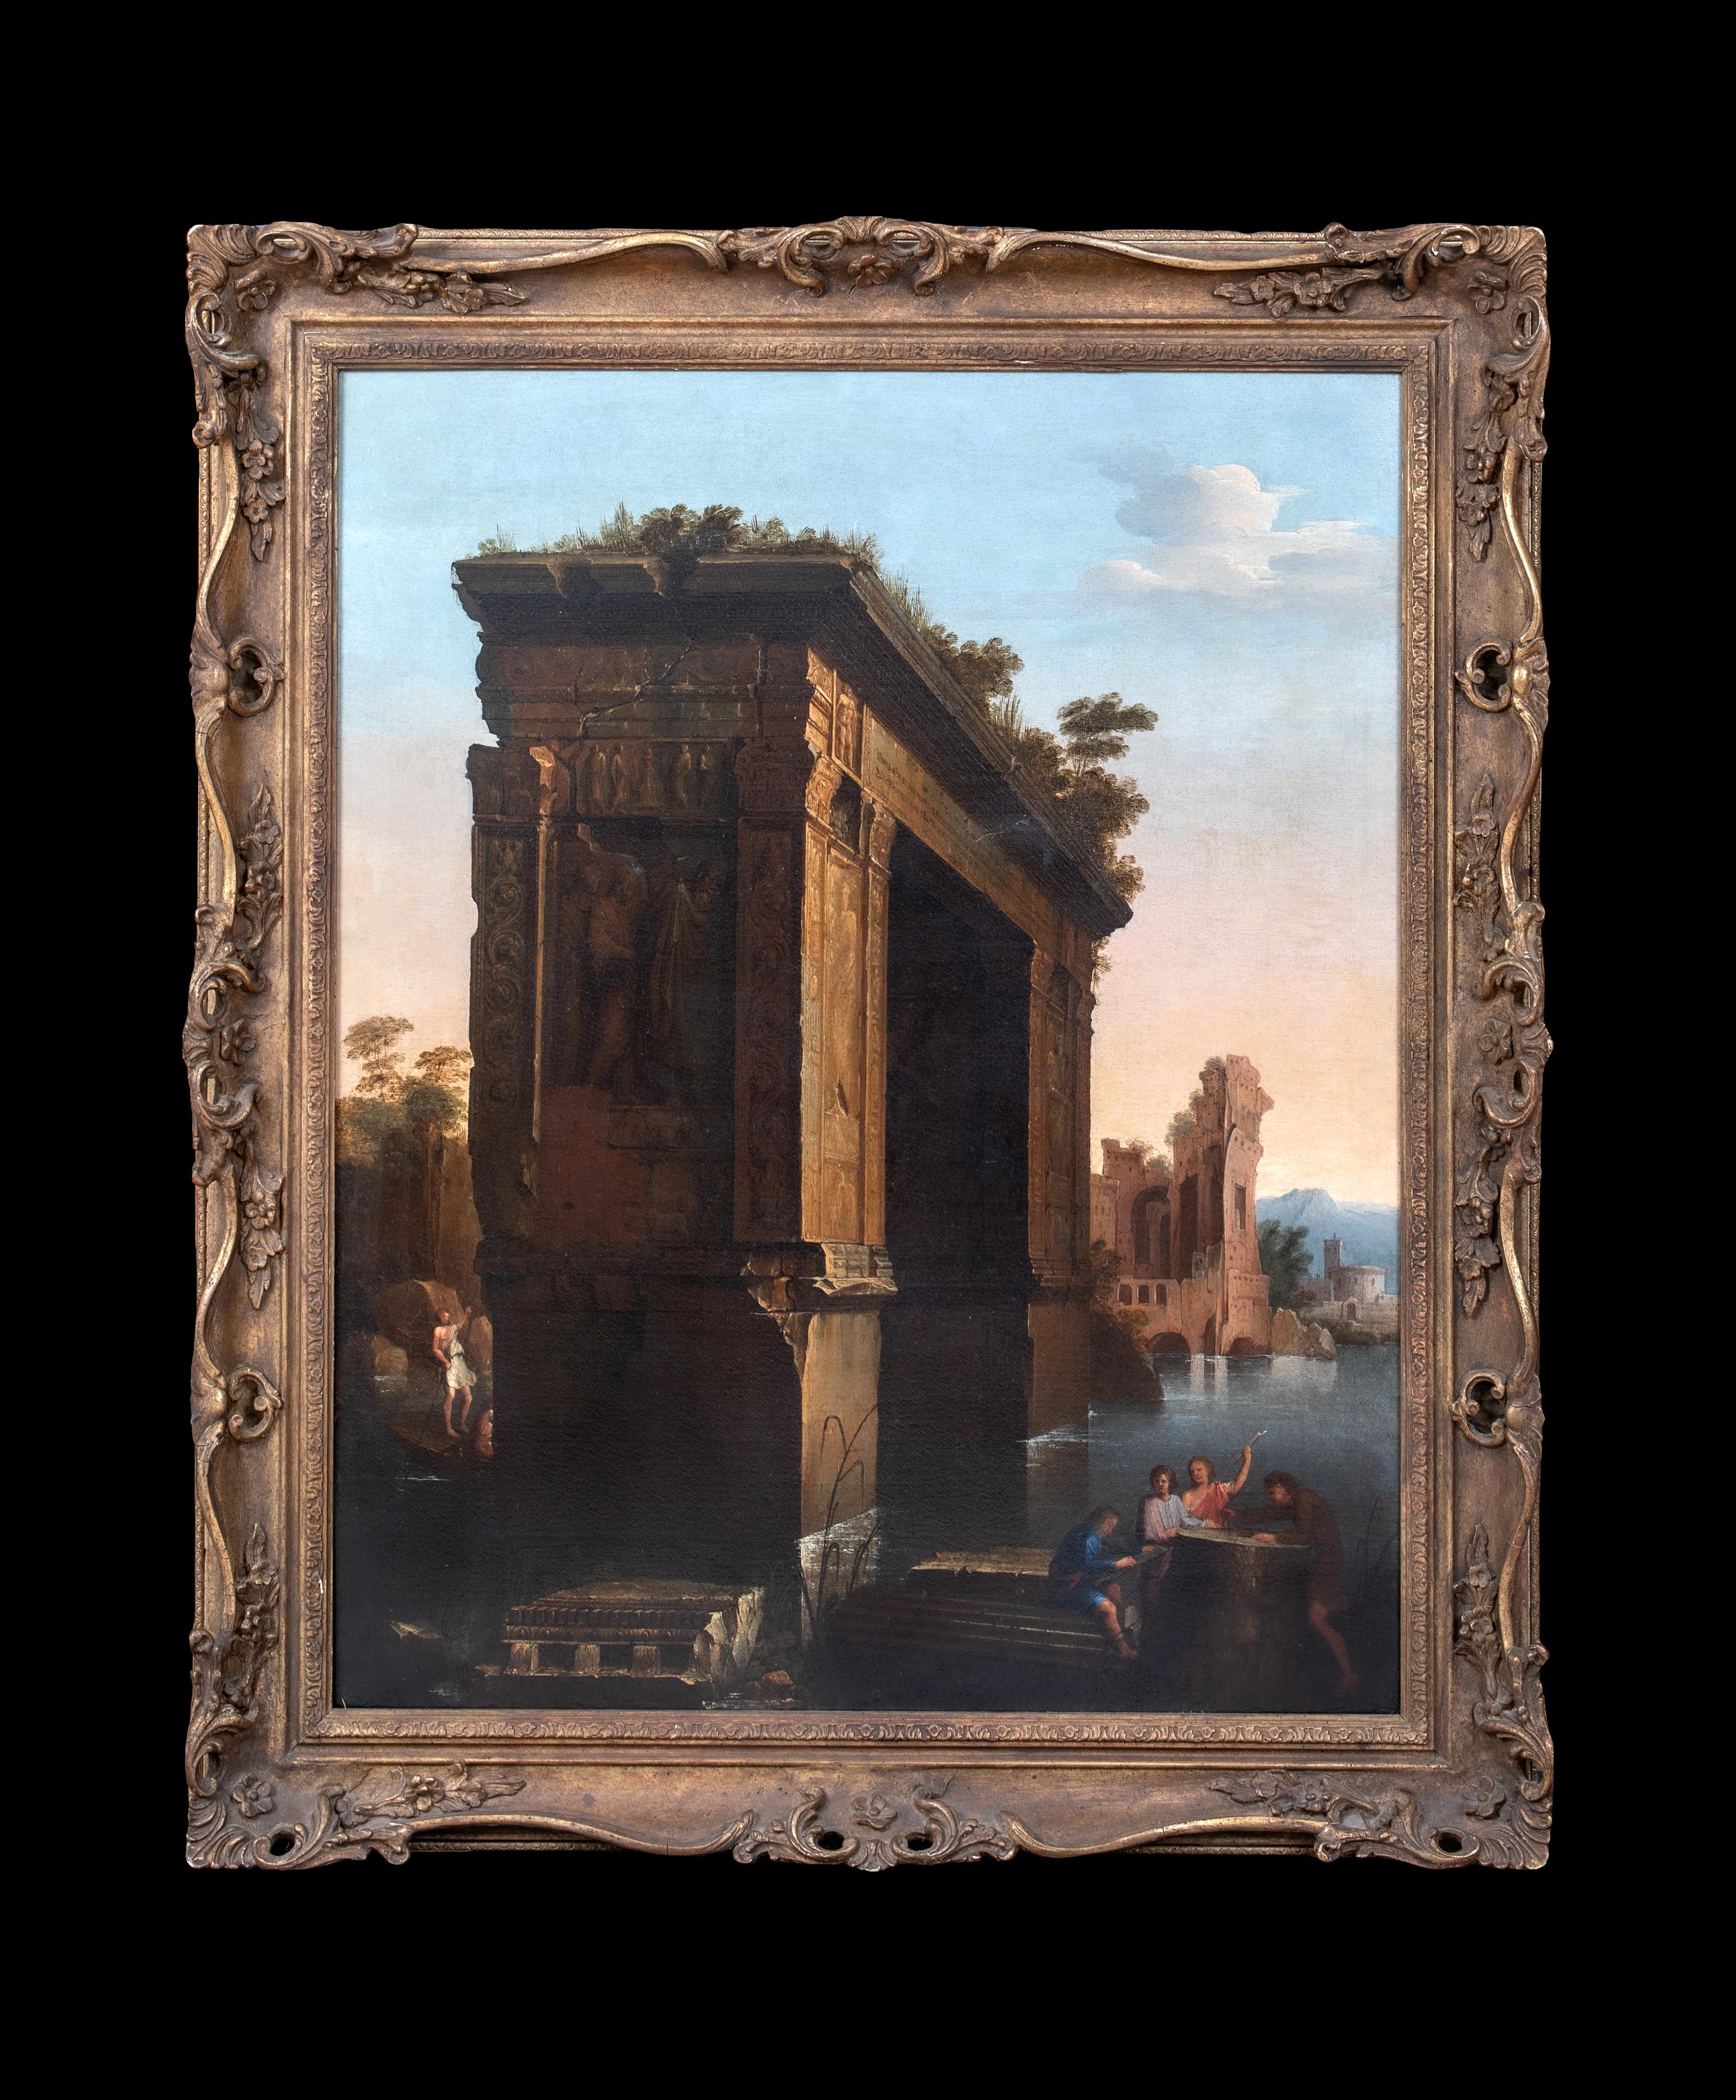 Figures By The Ruins Of An Arch, 18th Century    - Painting by Giovanni Paolo Panini